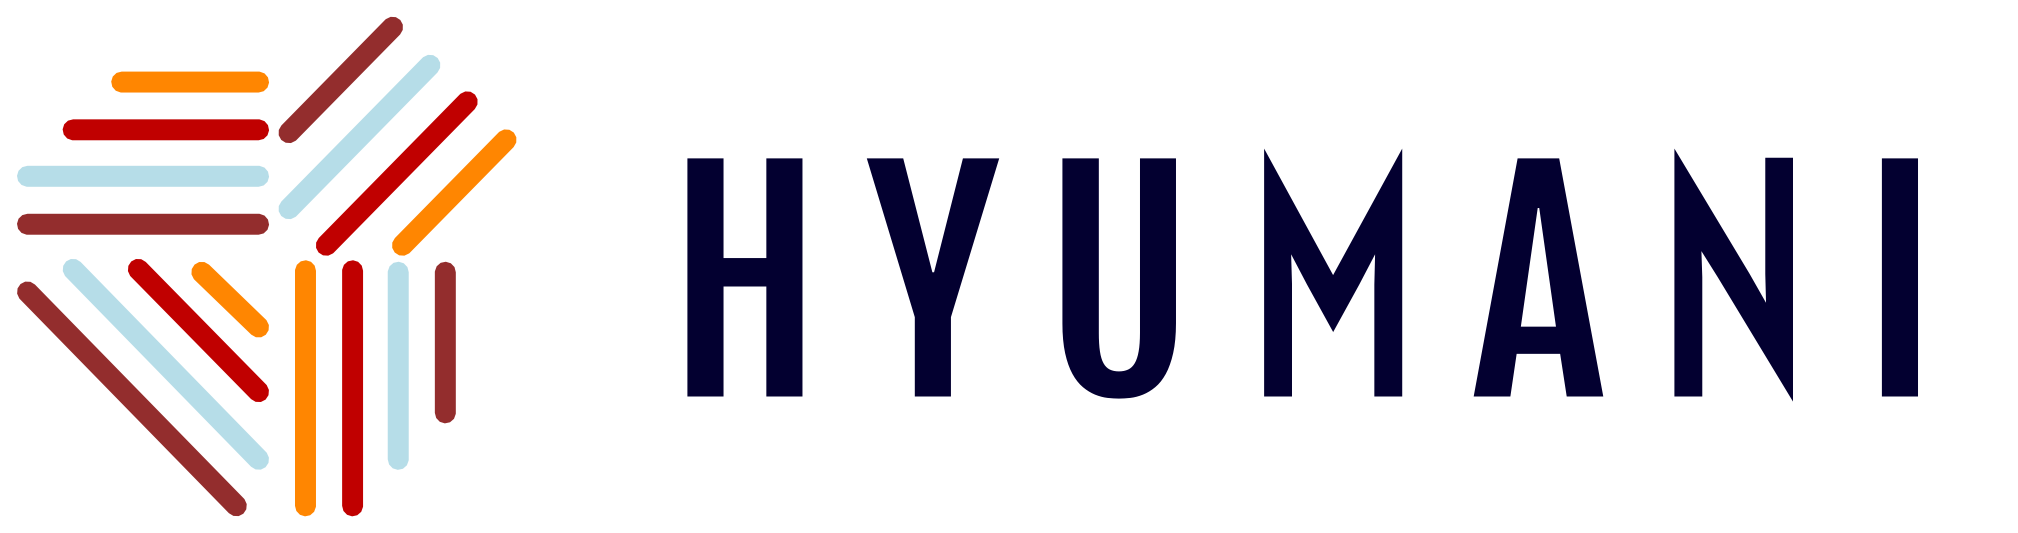 hyumani.com - solution to build personal brand and influence using impression management